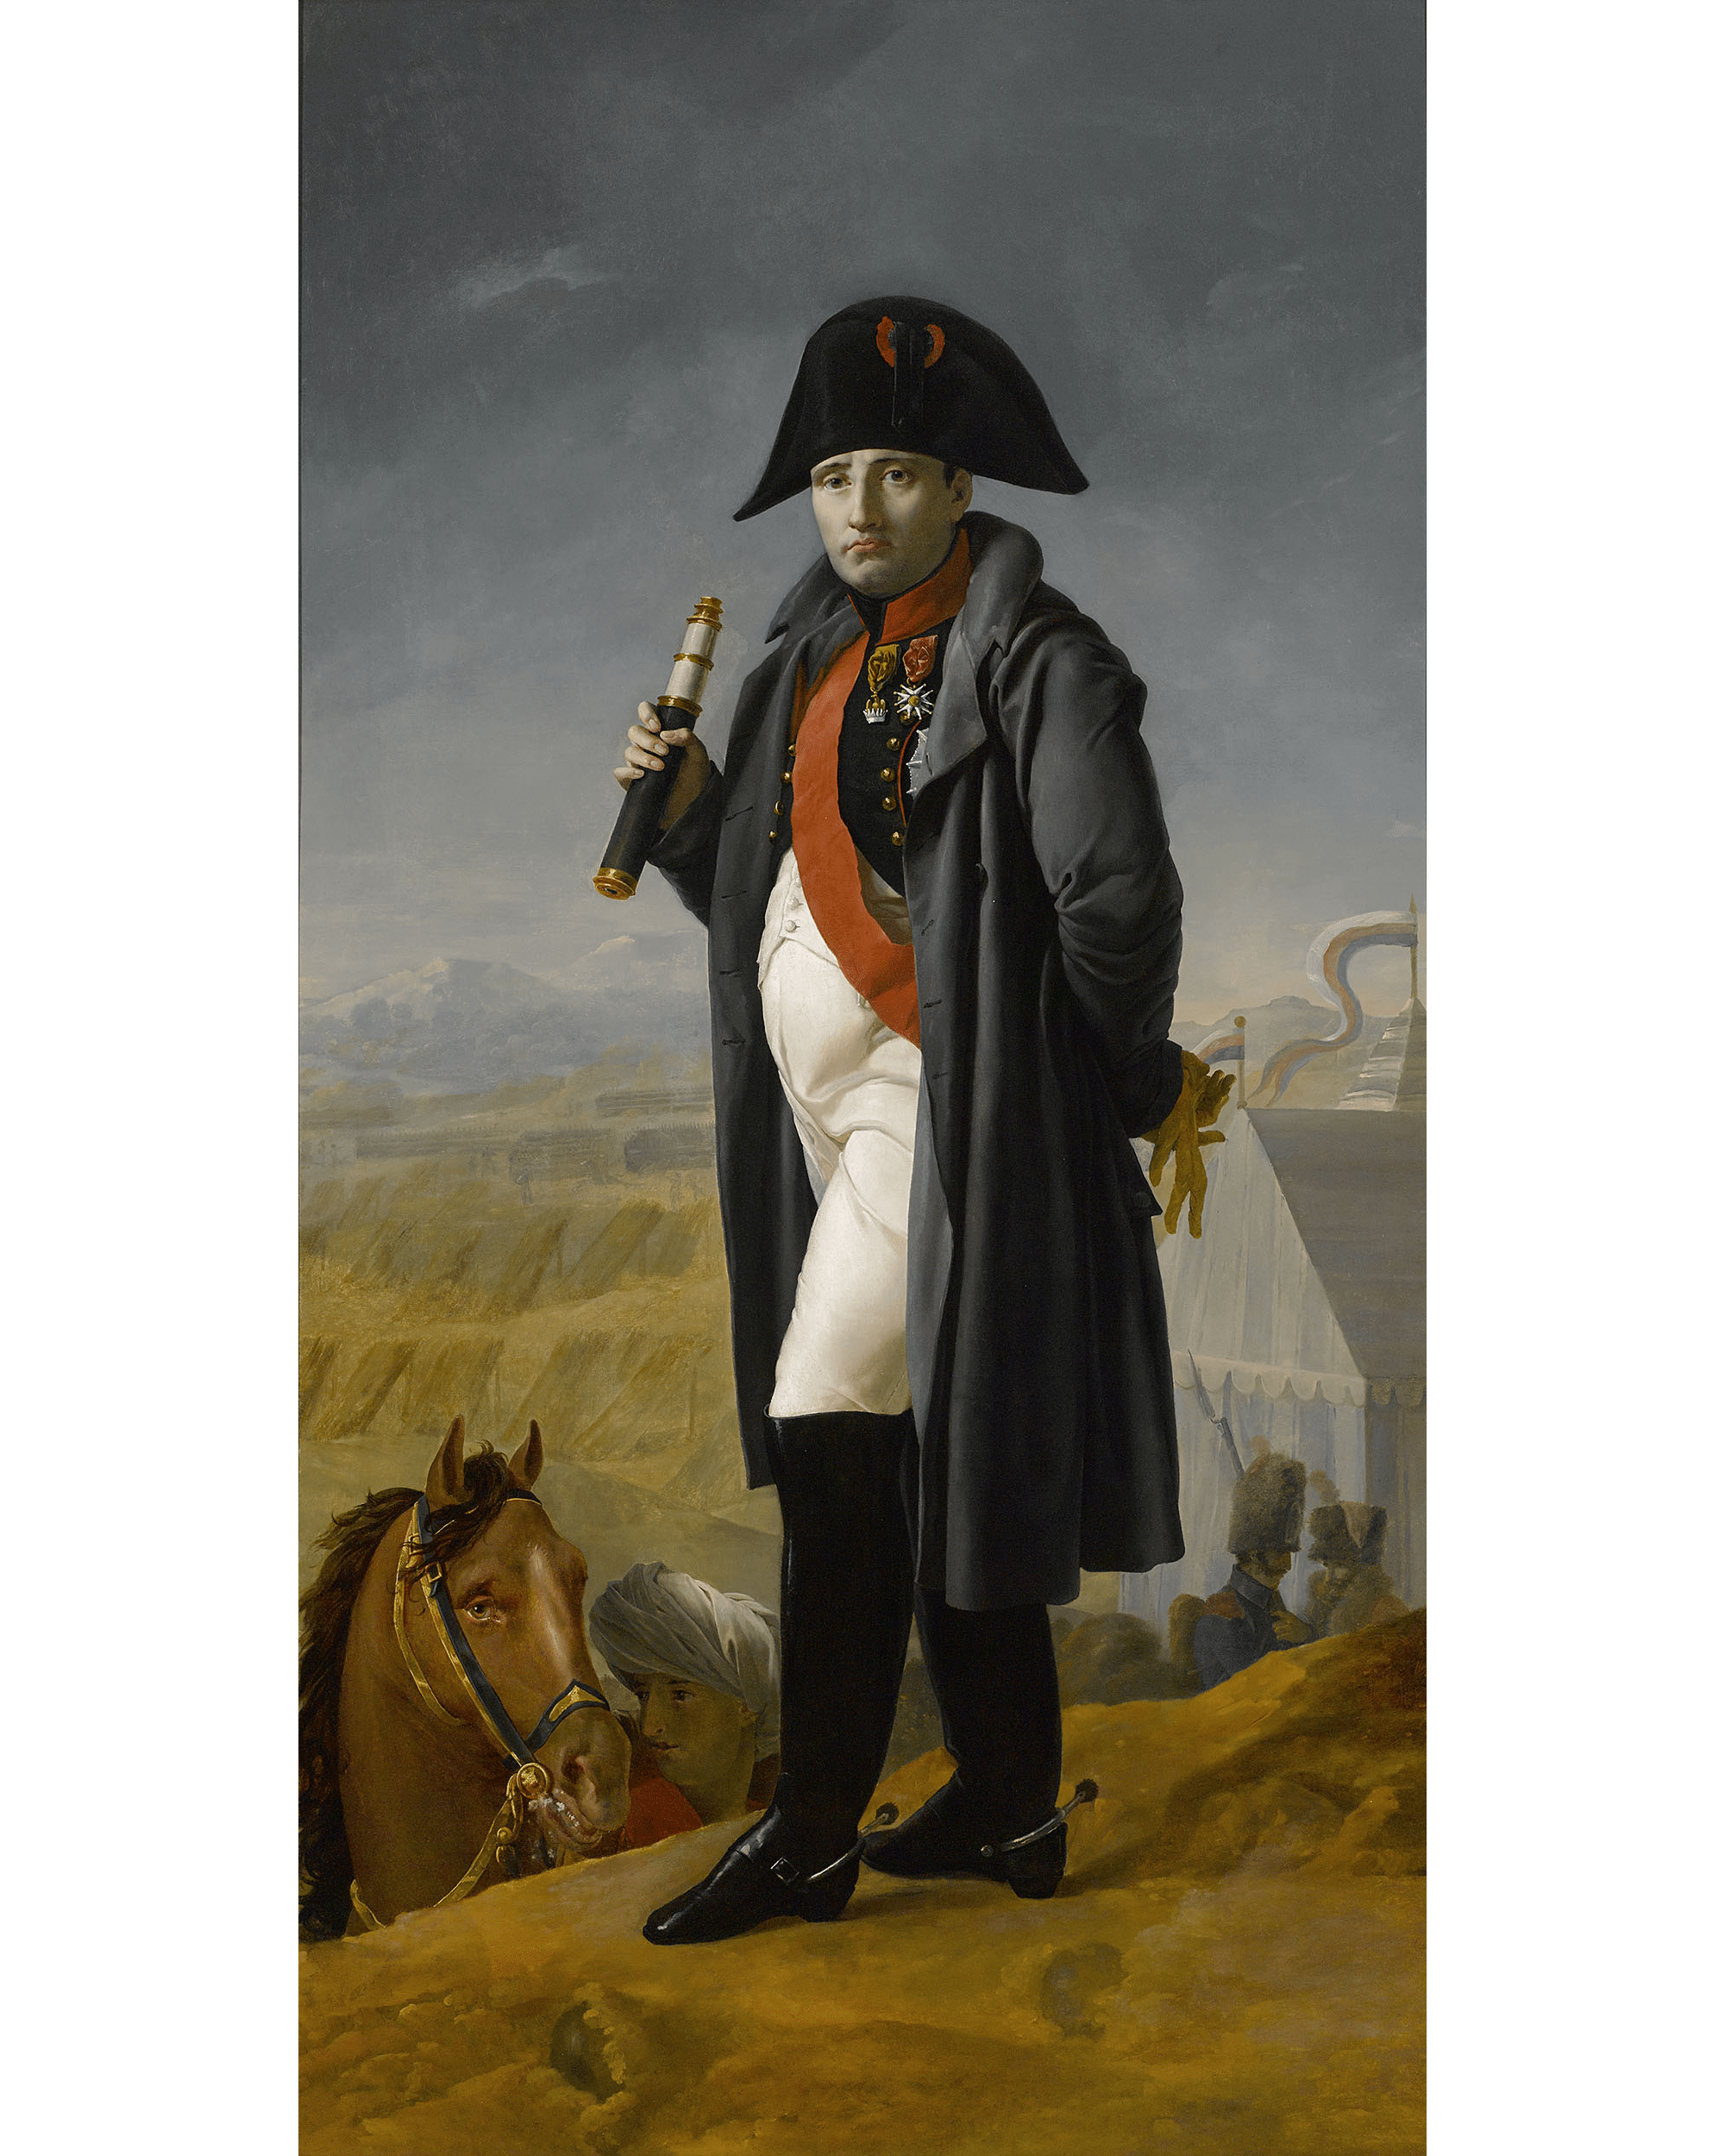 This extremely rare and monumental portrait of Napoleon I is the work of Joseph Franque